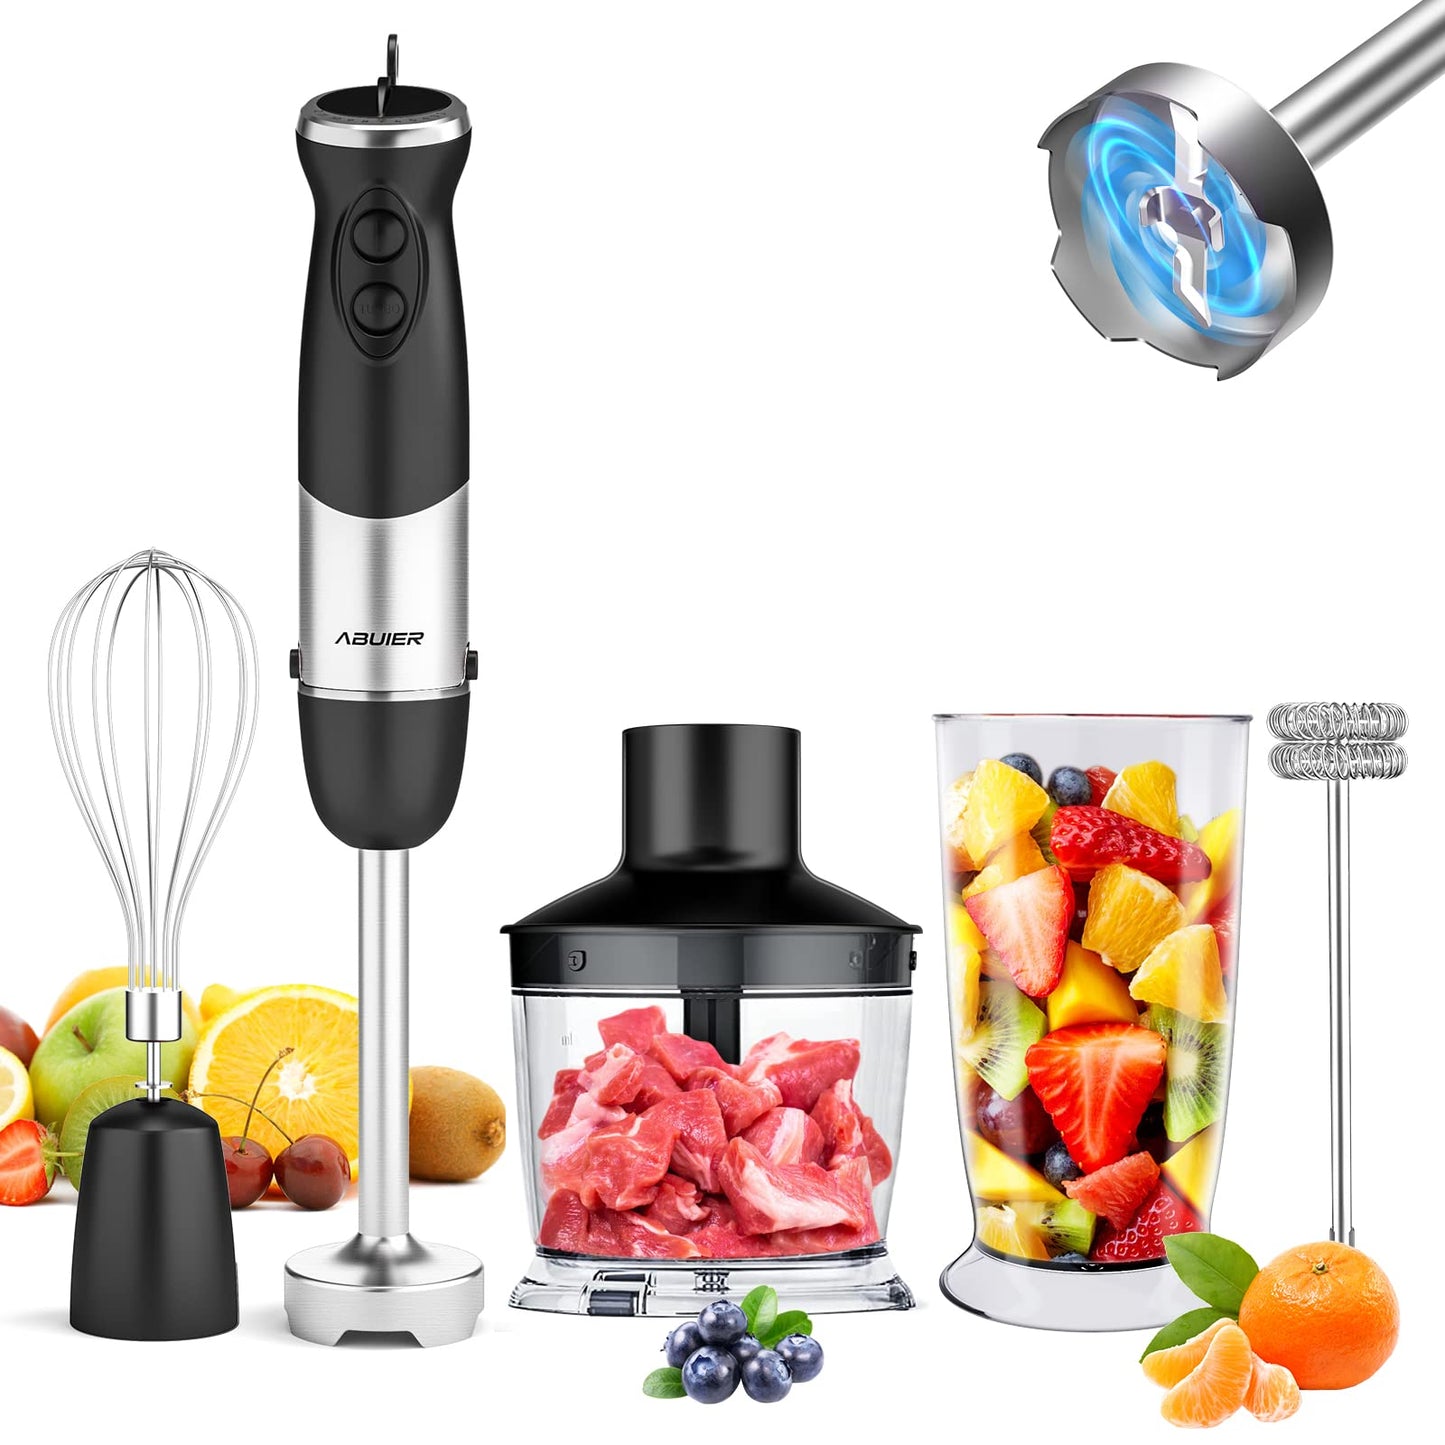 Abuler Handheld Immersion Blender 5 in 1 - 800W Hand Mixer Stick with 12  Speeds, Turbo Mode, and Stainless Steel Blades - Includes Mixing Beaker